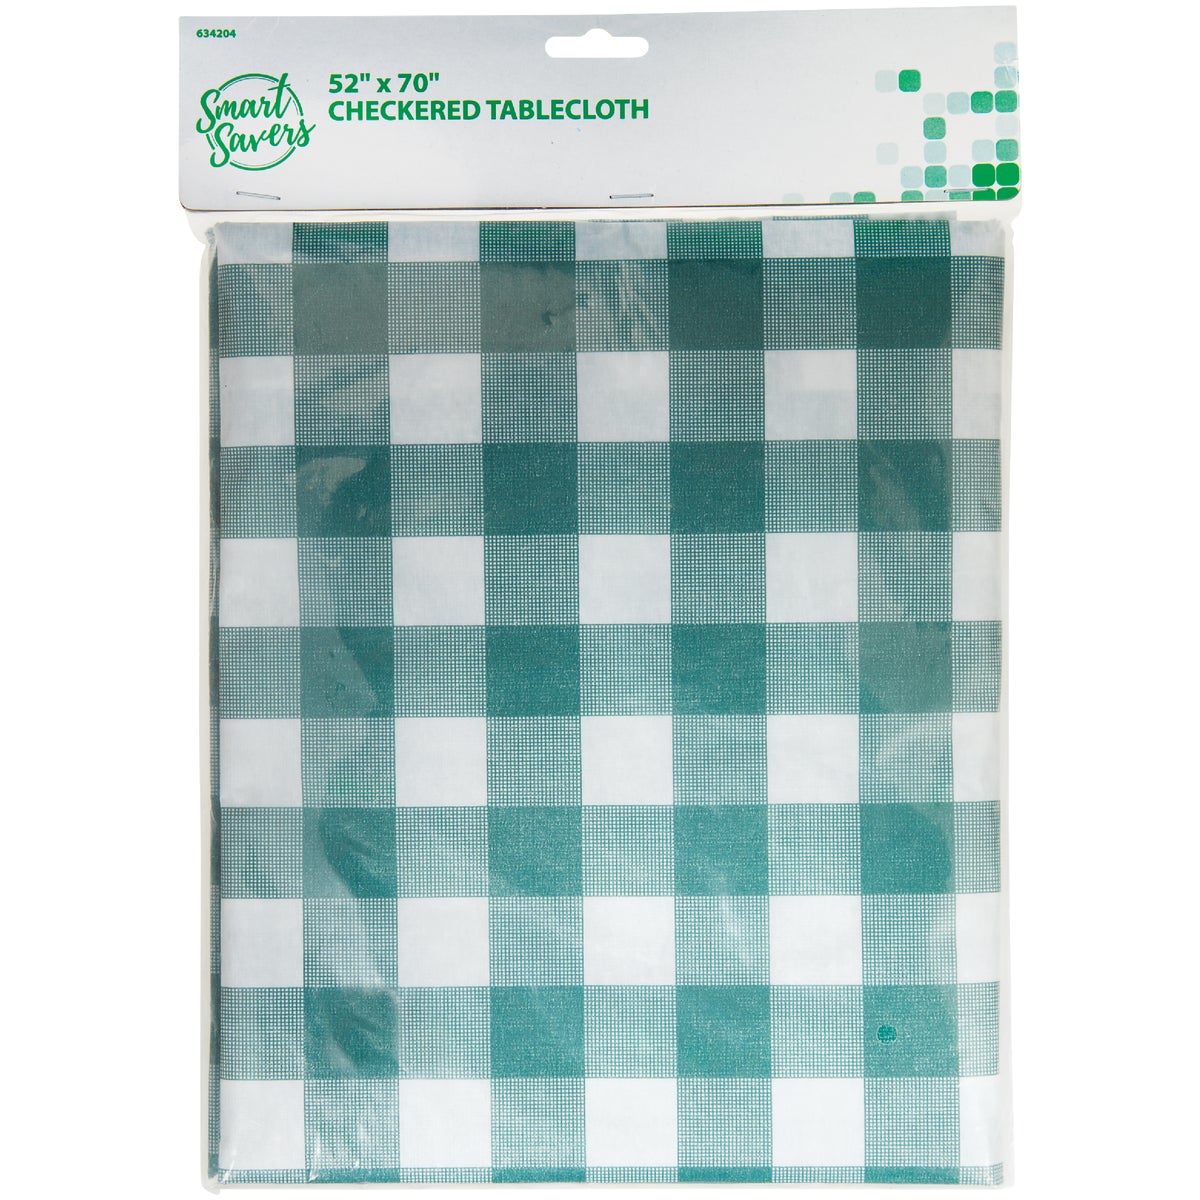 Item 634204, Smart Savers 52 inches wide x 70 inches long tablecloth.